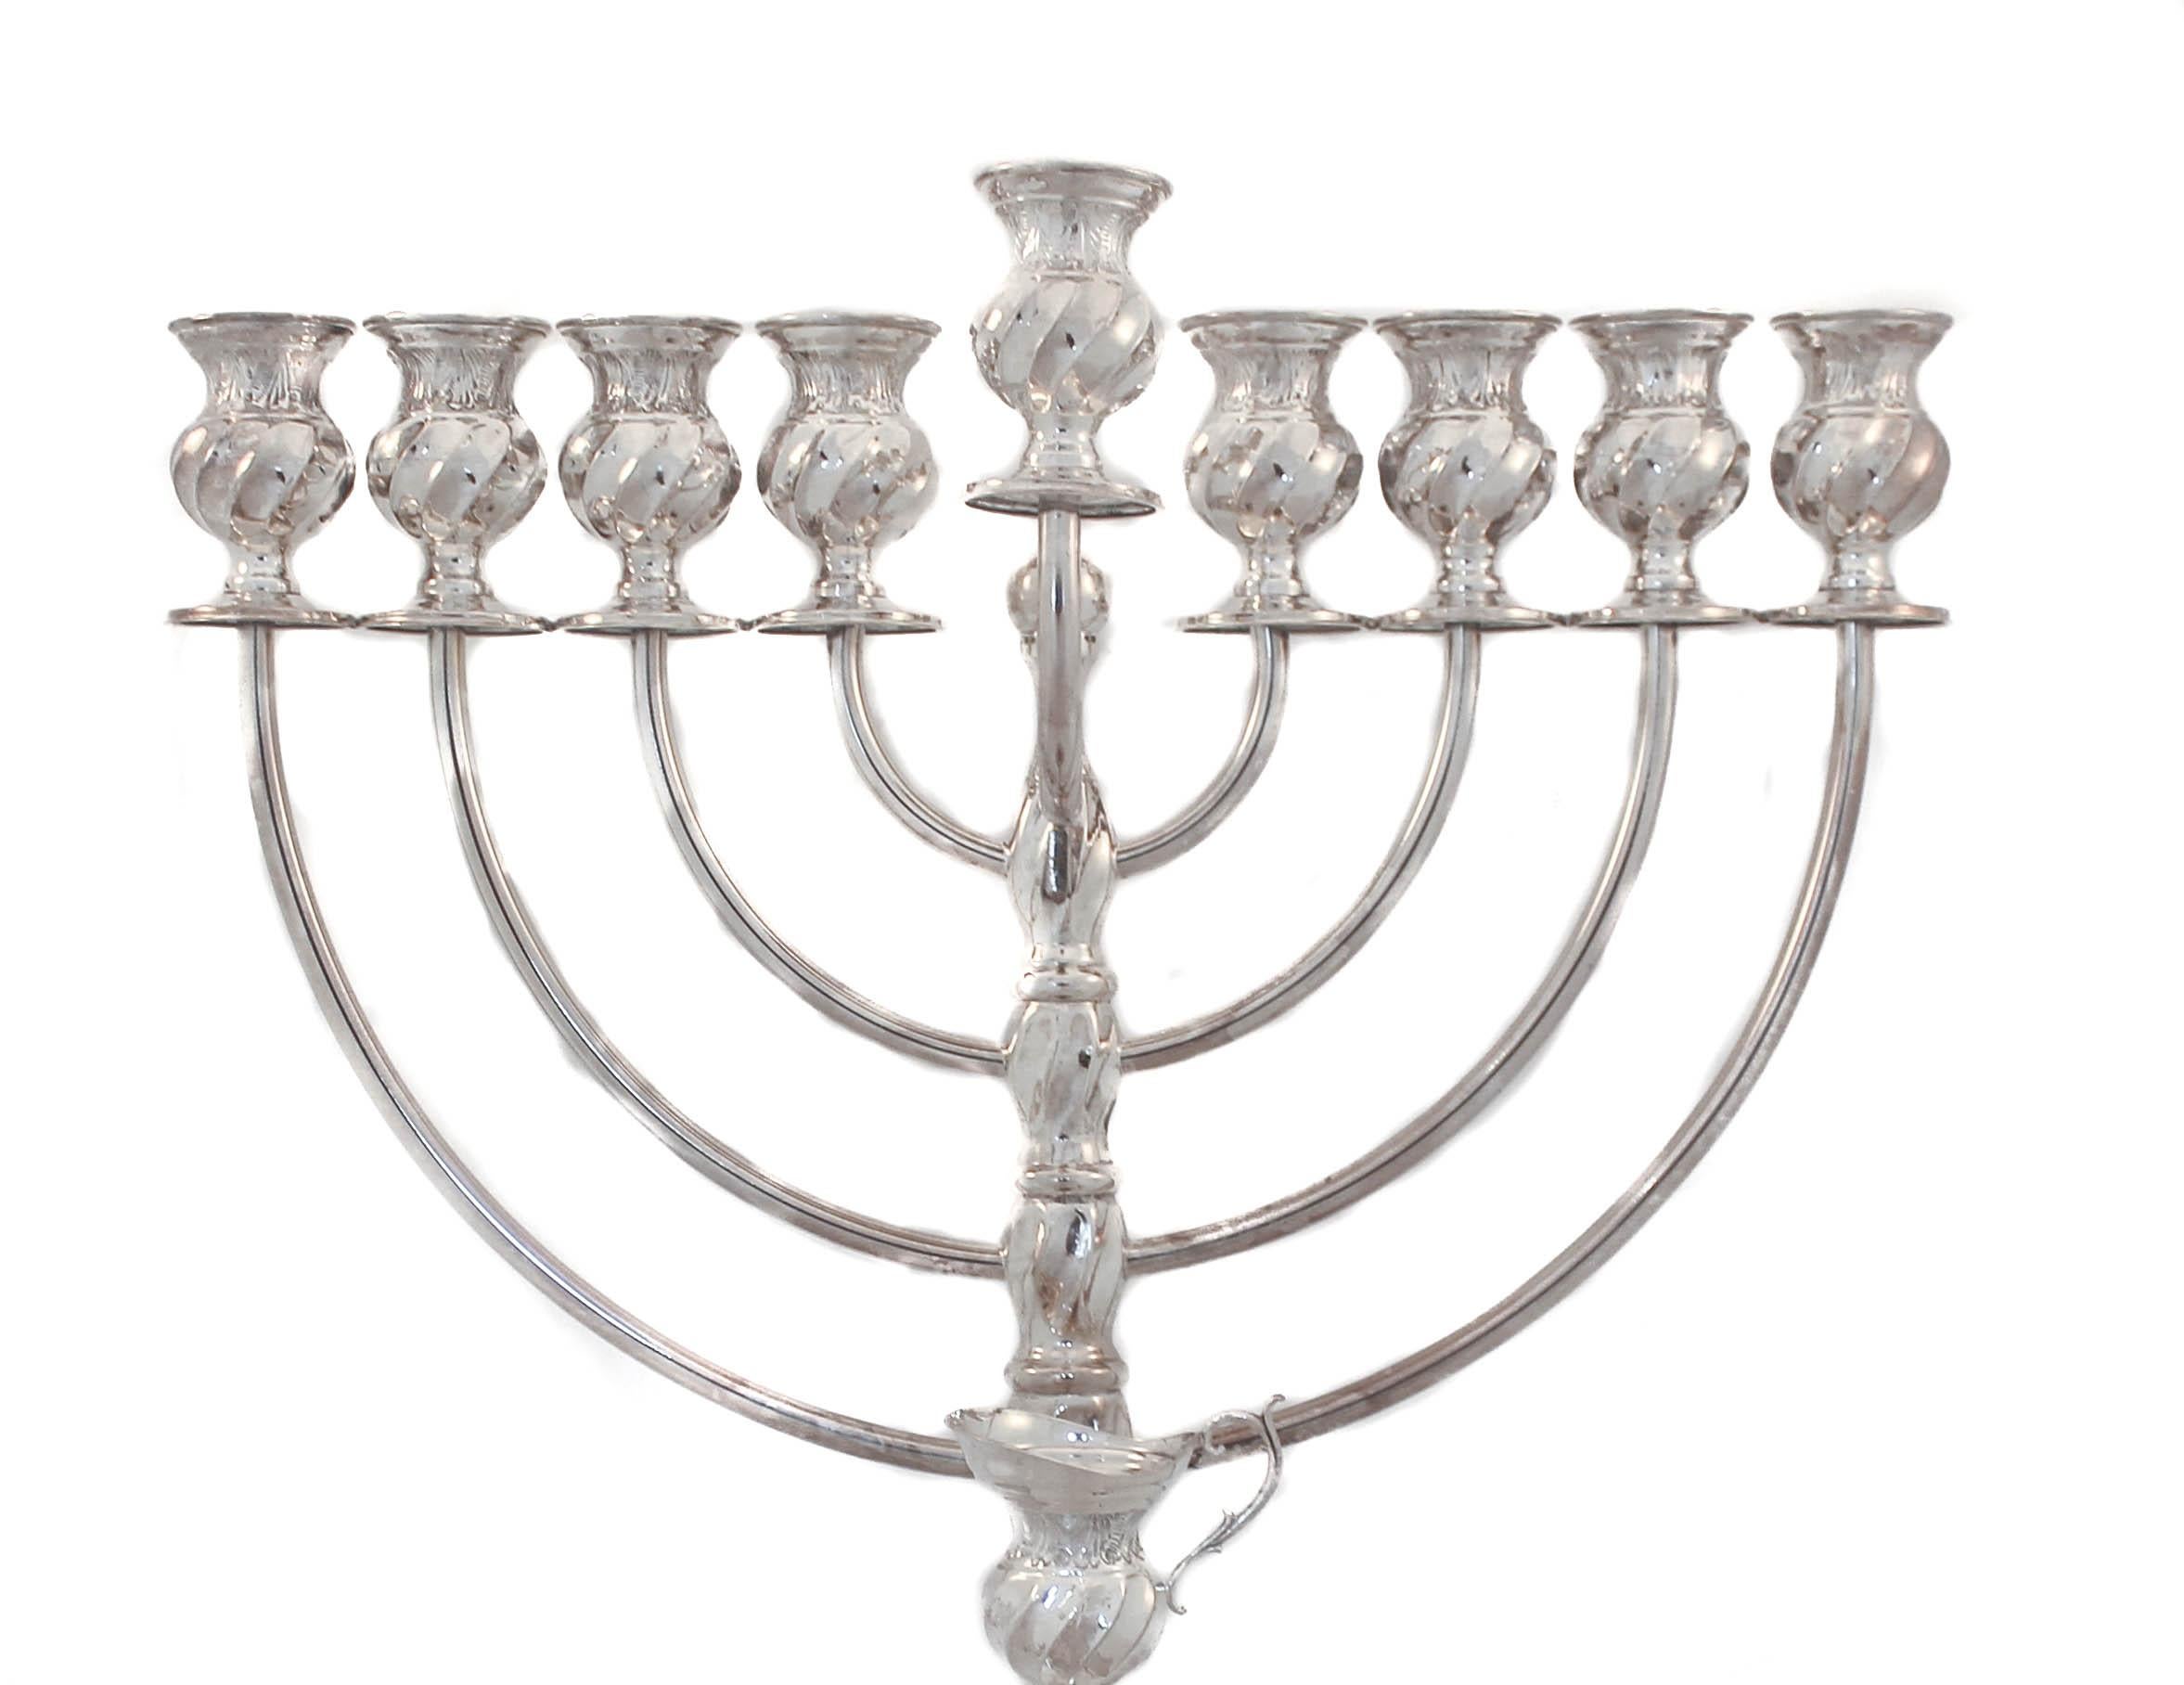 We are delighted to offer you this sterling silver modern menorah. With Hanukkah just a few weeks away, now is the time to treat yourself to a gorgeous new silver menorah. It has a sleek finish that is contemporary and very unusual. It has swirls